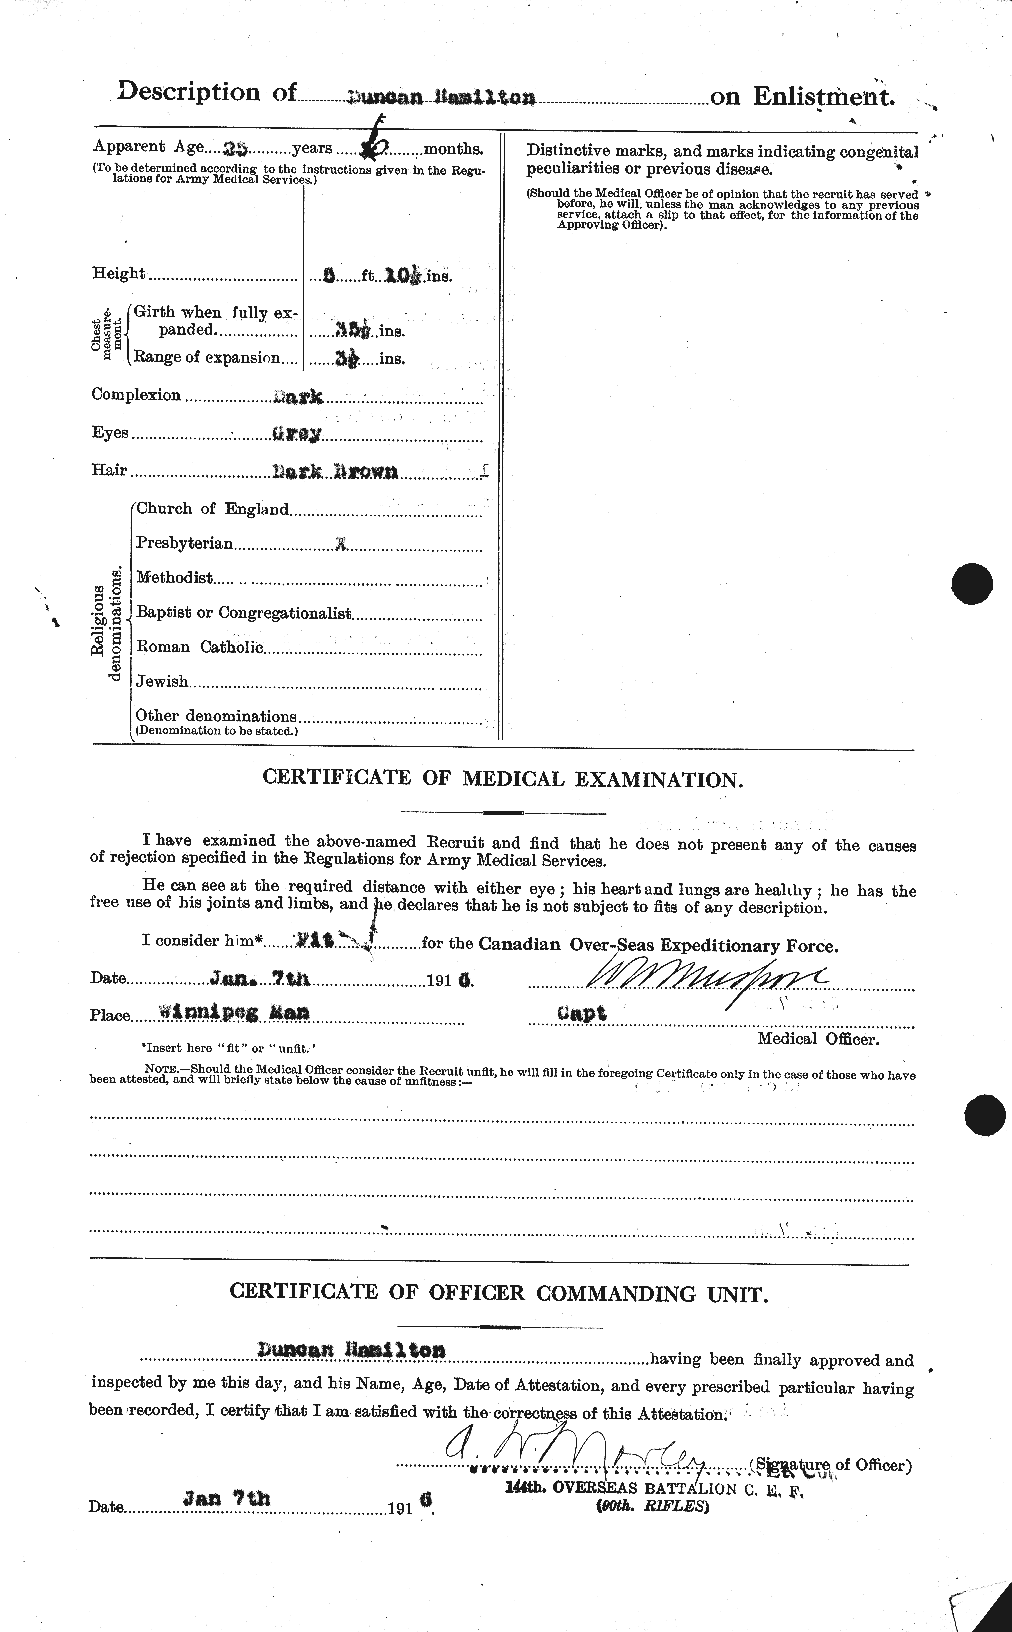 Personnel Records of the First World War - CEF 375365b